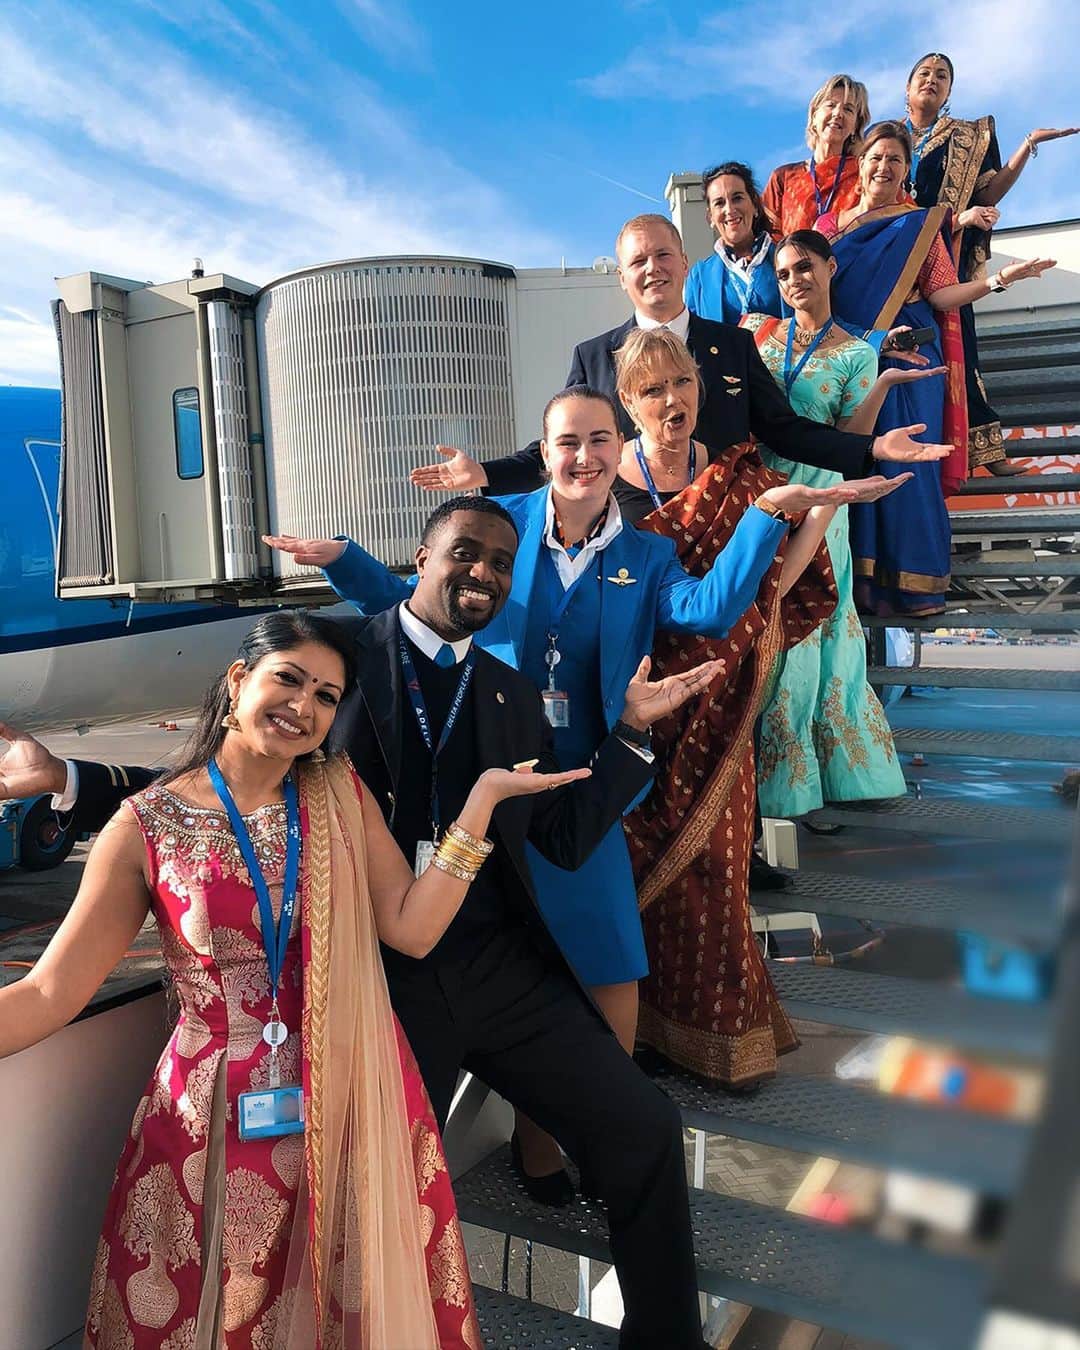 KLMオランダ航空のインスタグラム：「Wishing you a journey illuminated with happiness! 🌟✈️ Our dedicated ground crew is all set to make your travel experience truly luminous today. 🪔   📸: @christinapiessens & @rachelflorenceklopper   #klm #royaldutchairlines #Diwali #Divali #Deepavali #Deevali #groundcrew #passengerservices #klmcrew #lightfestival」